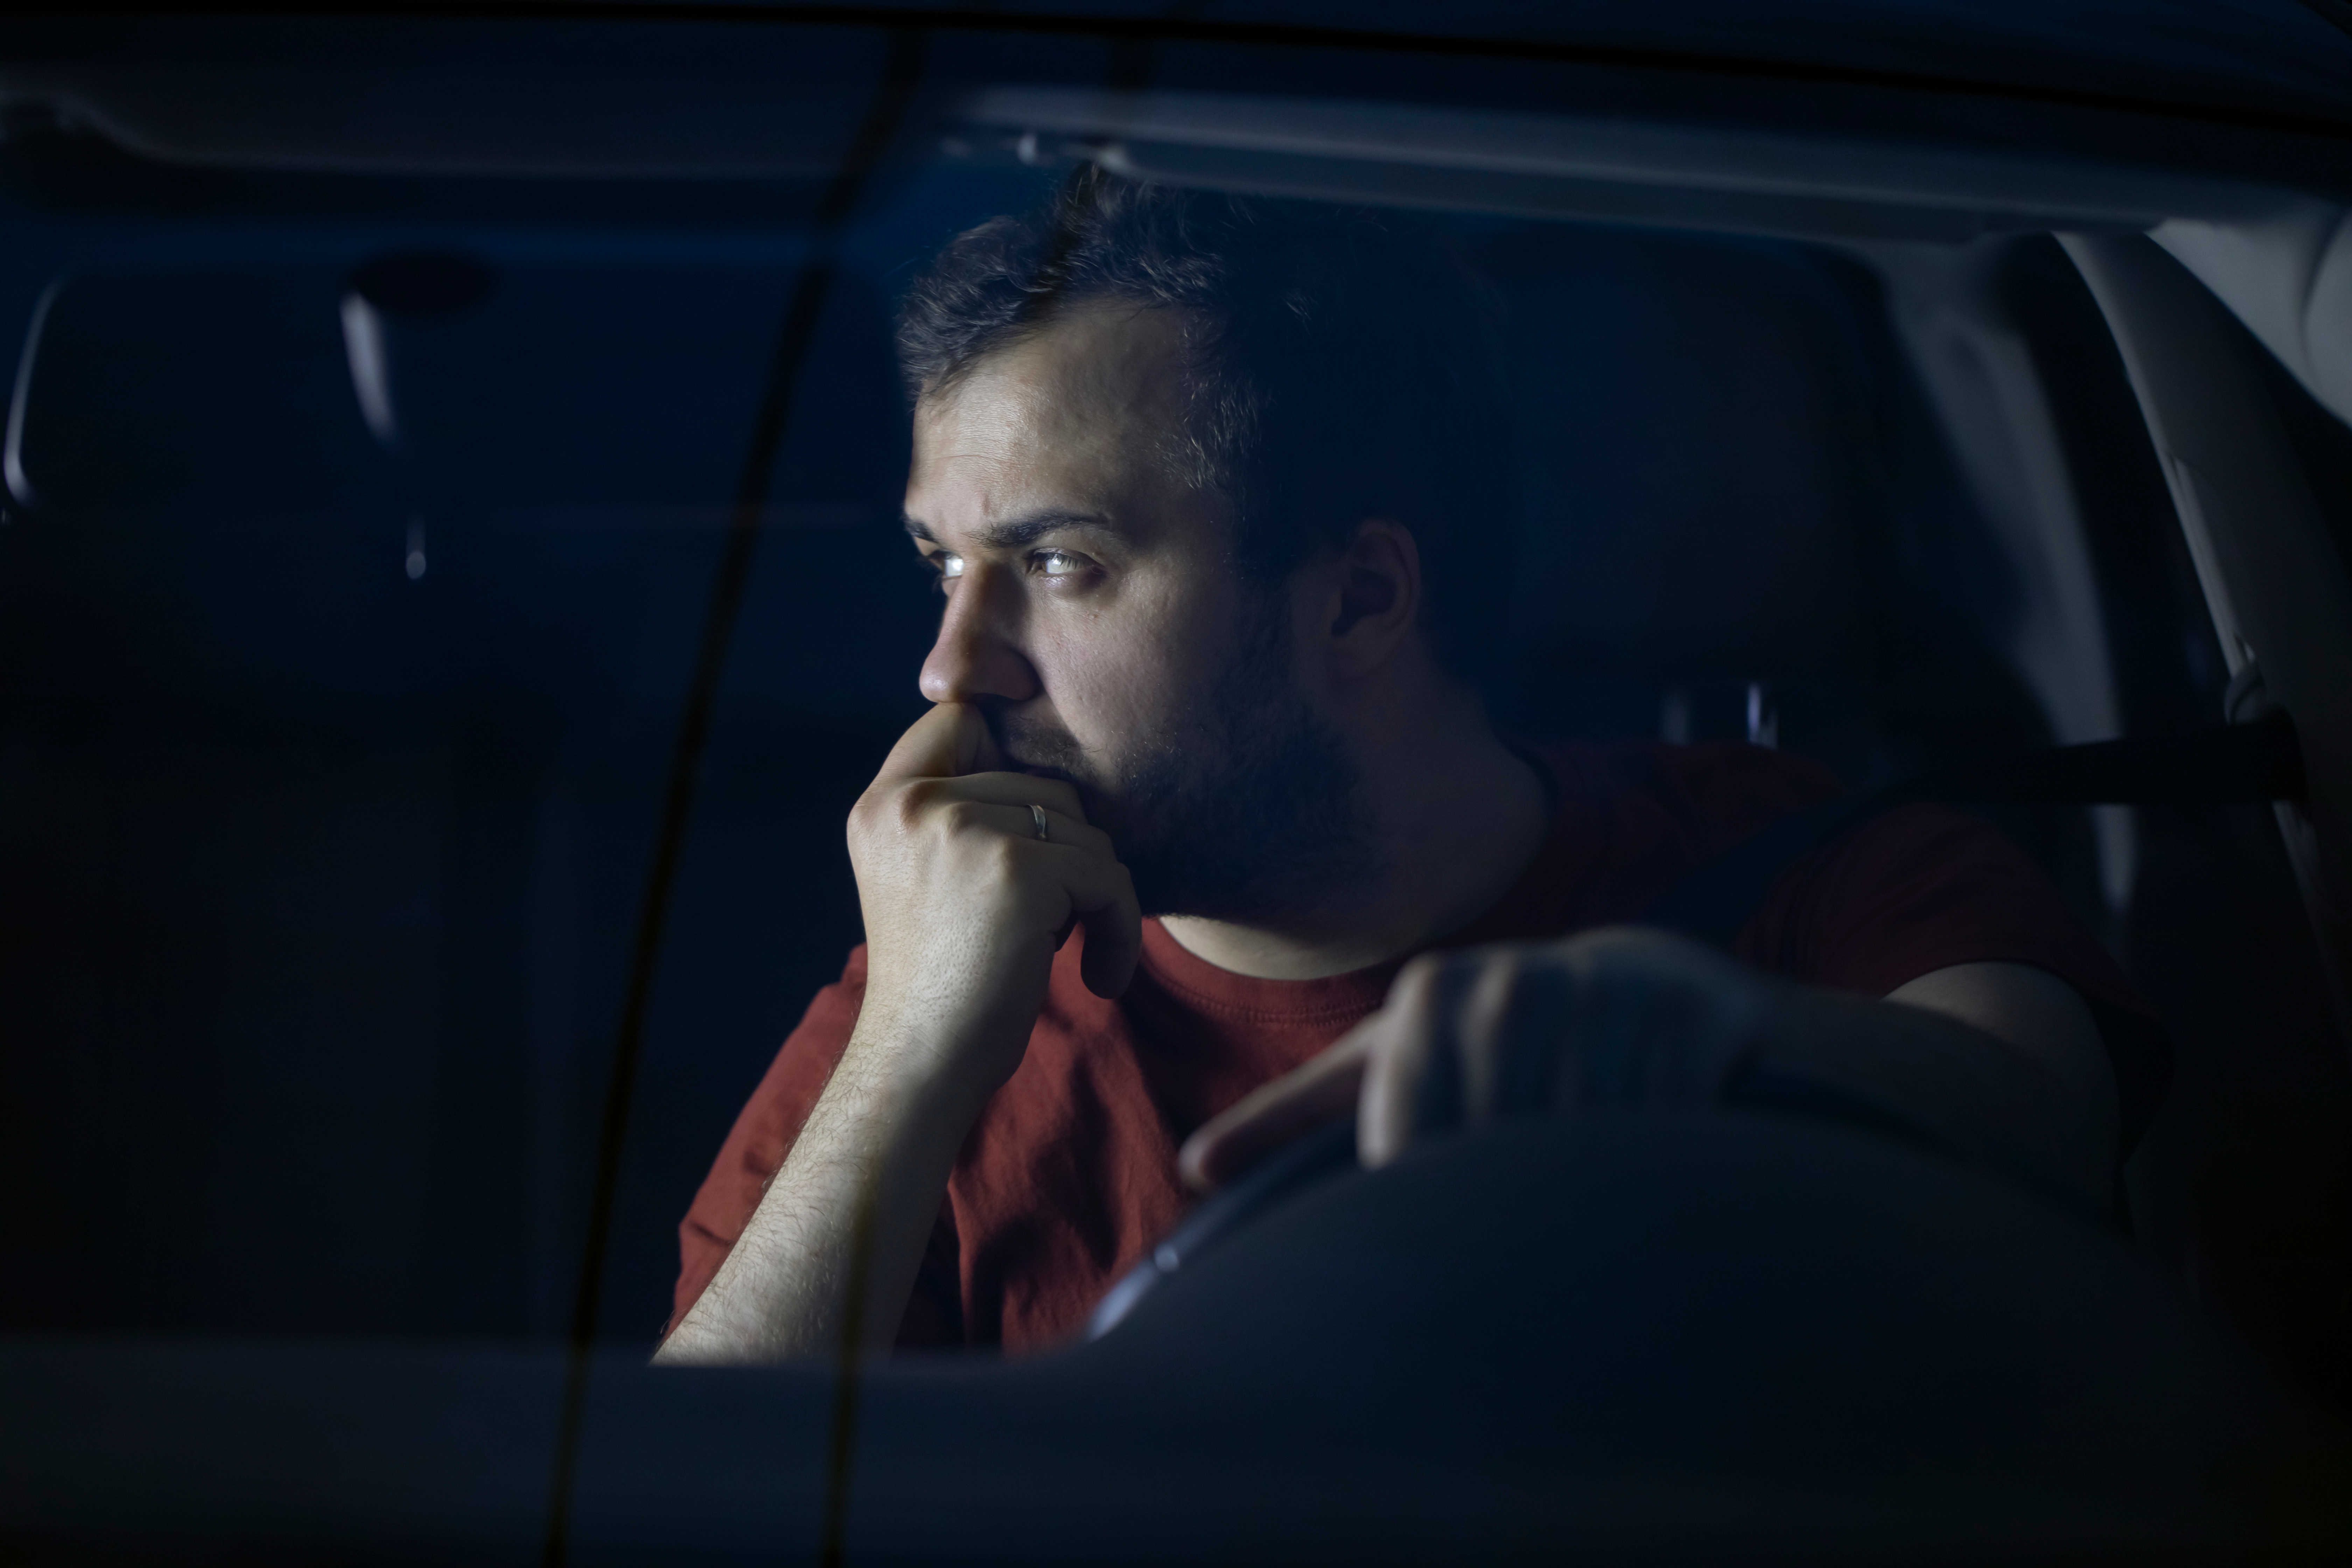 Sad depressed man spending time alone at car thinking about problems feeling lonely. | Source: Shutterstock